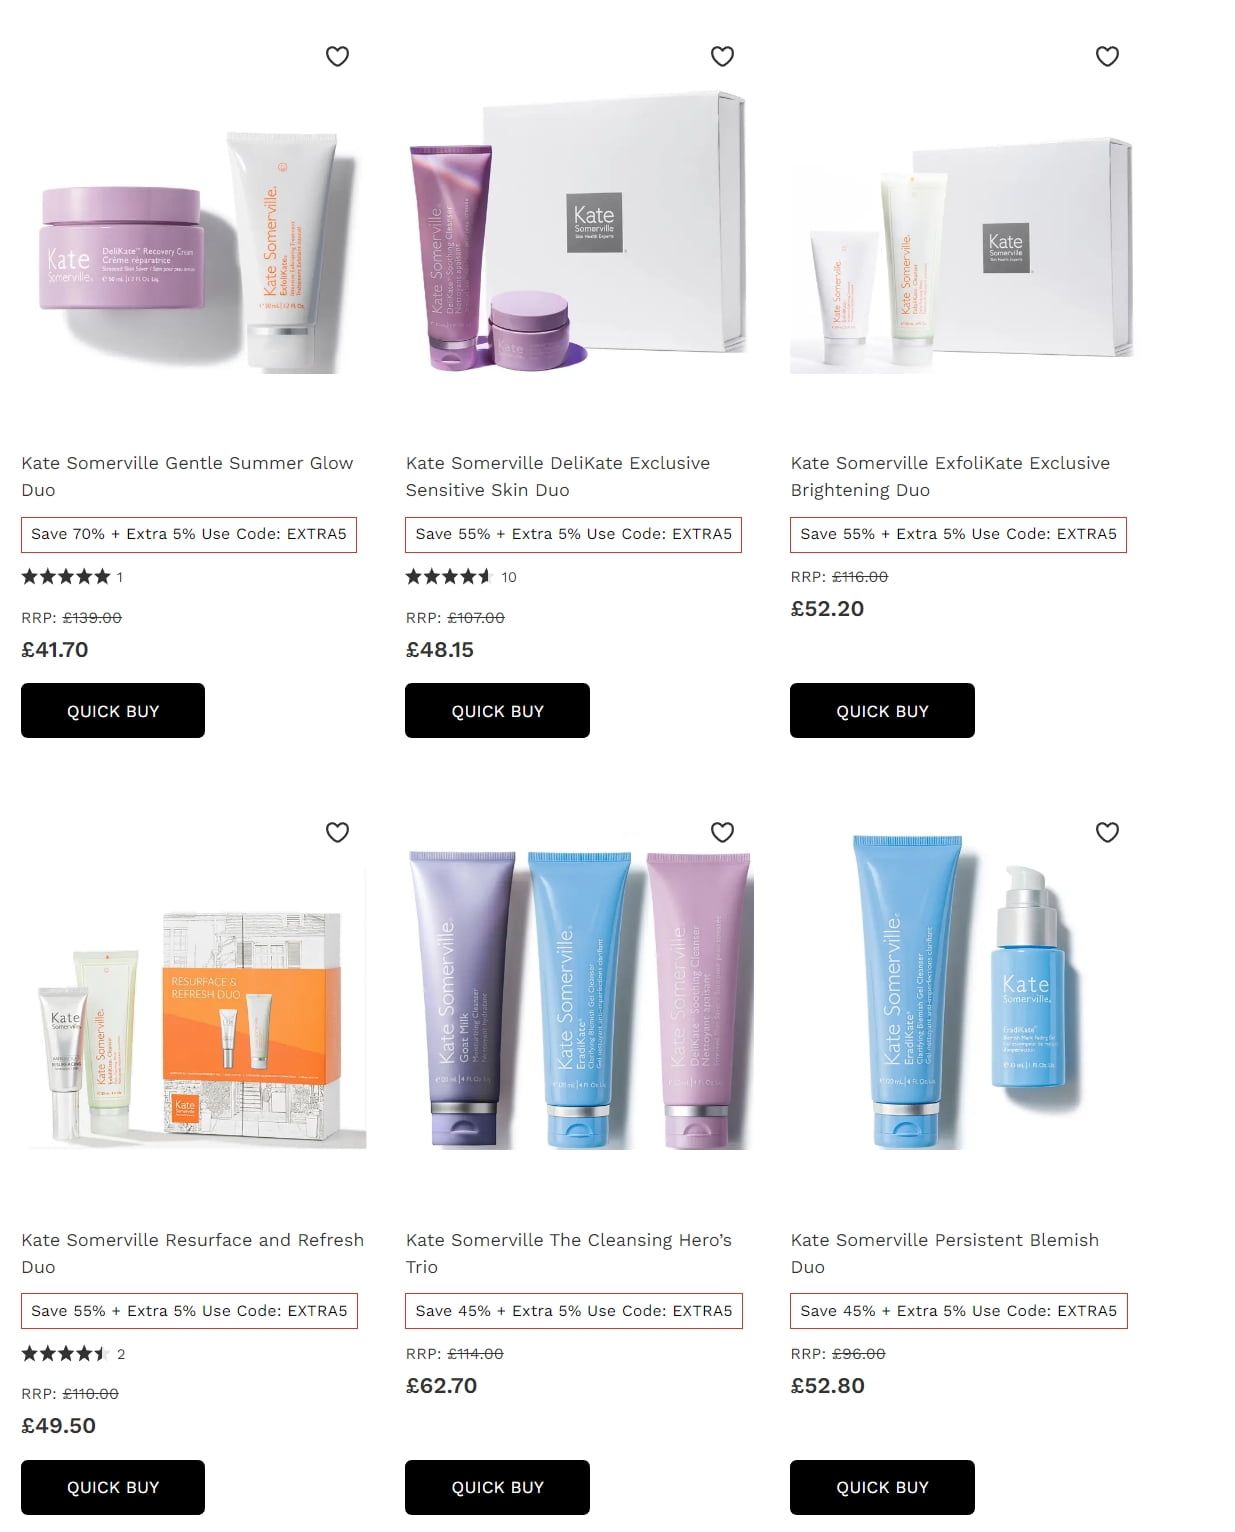 Up to 70% off Kate Somerville at Lookfantastic